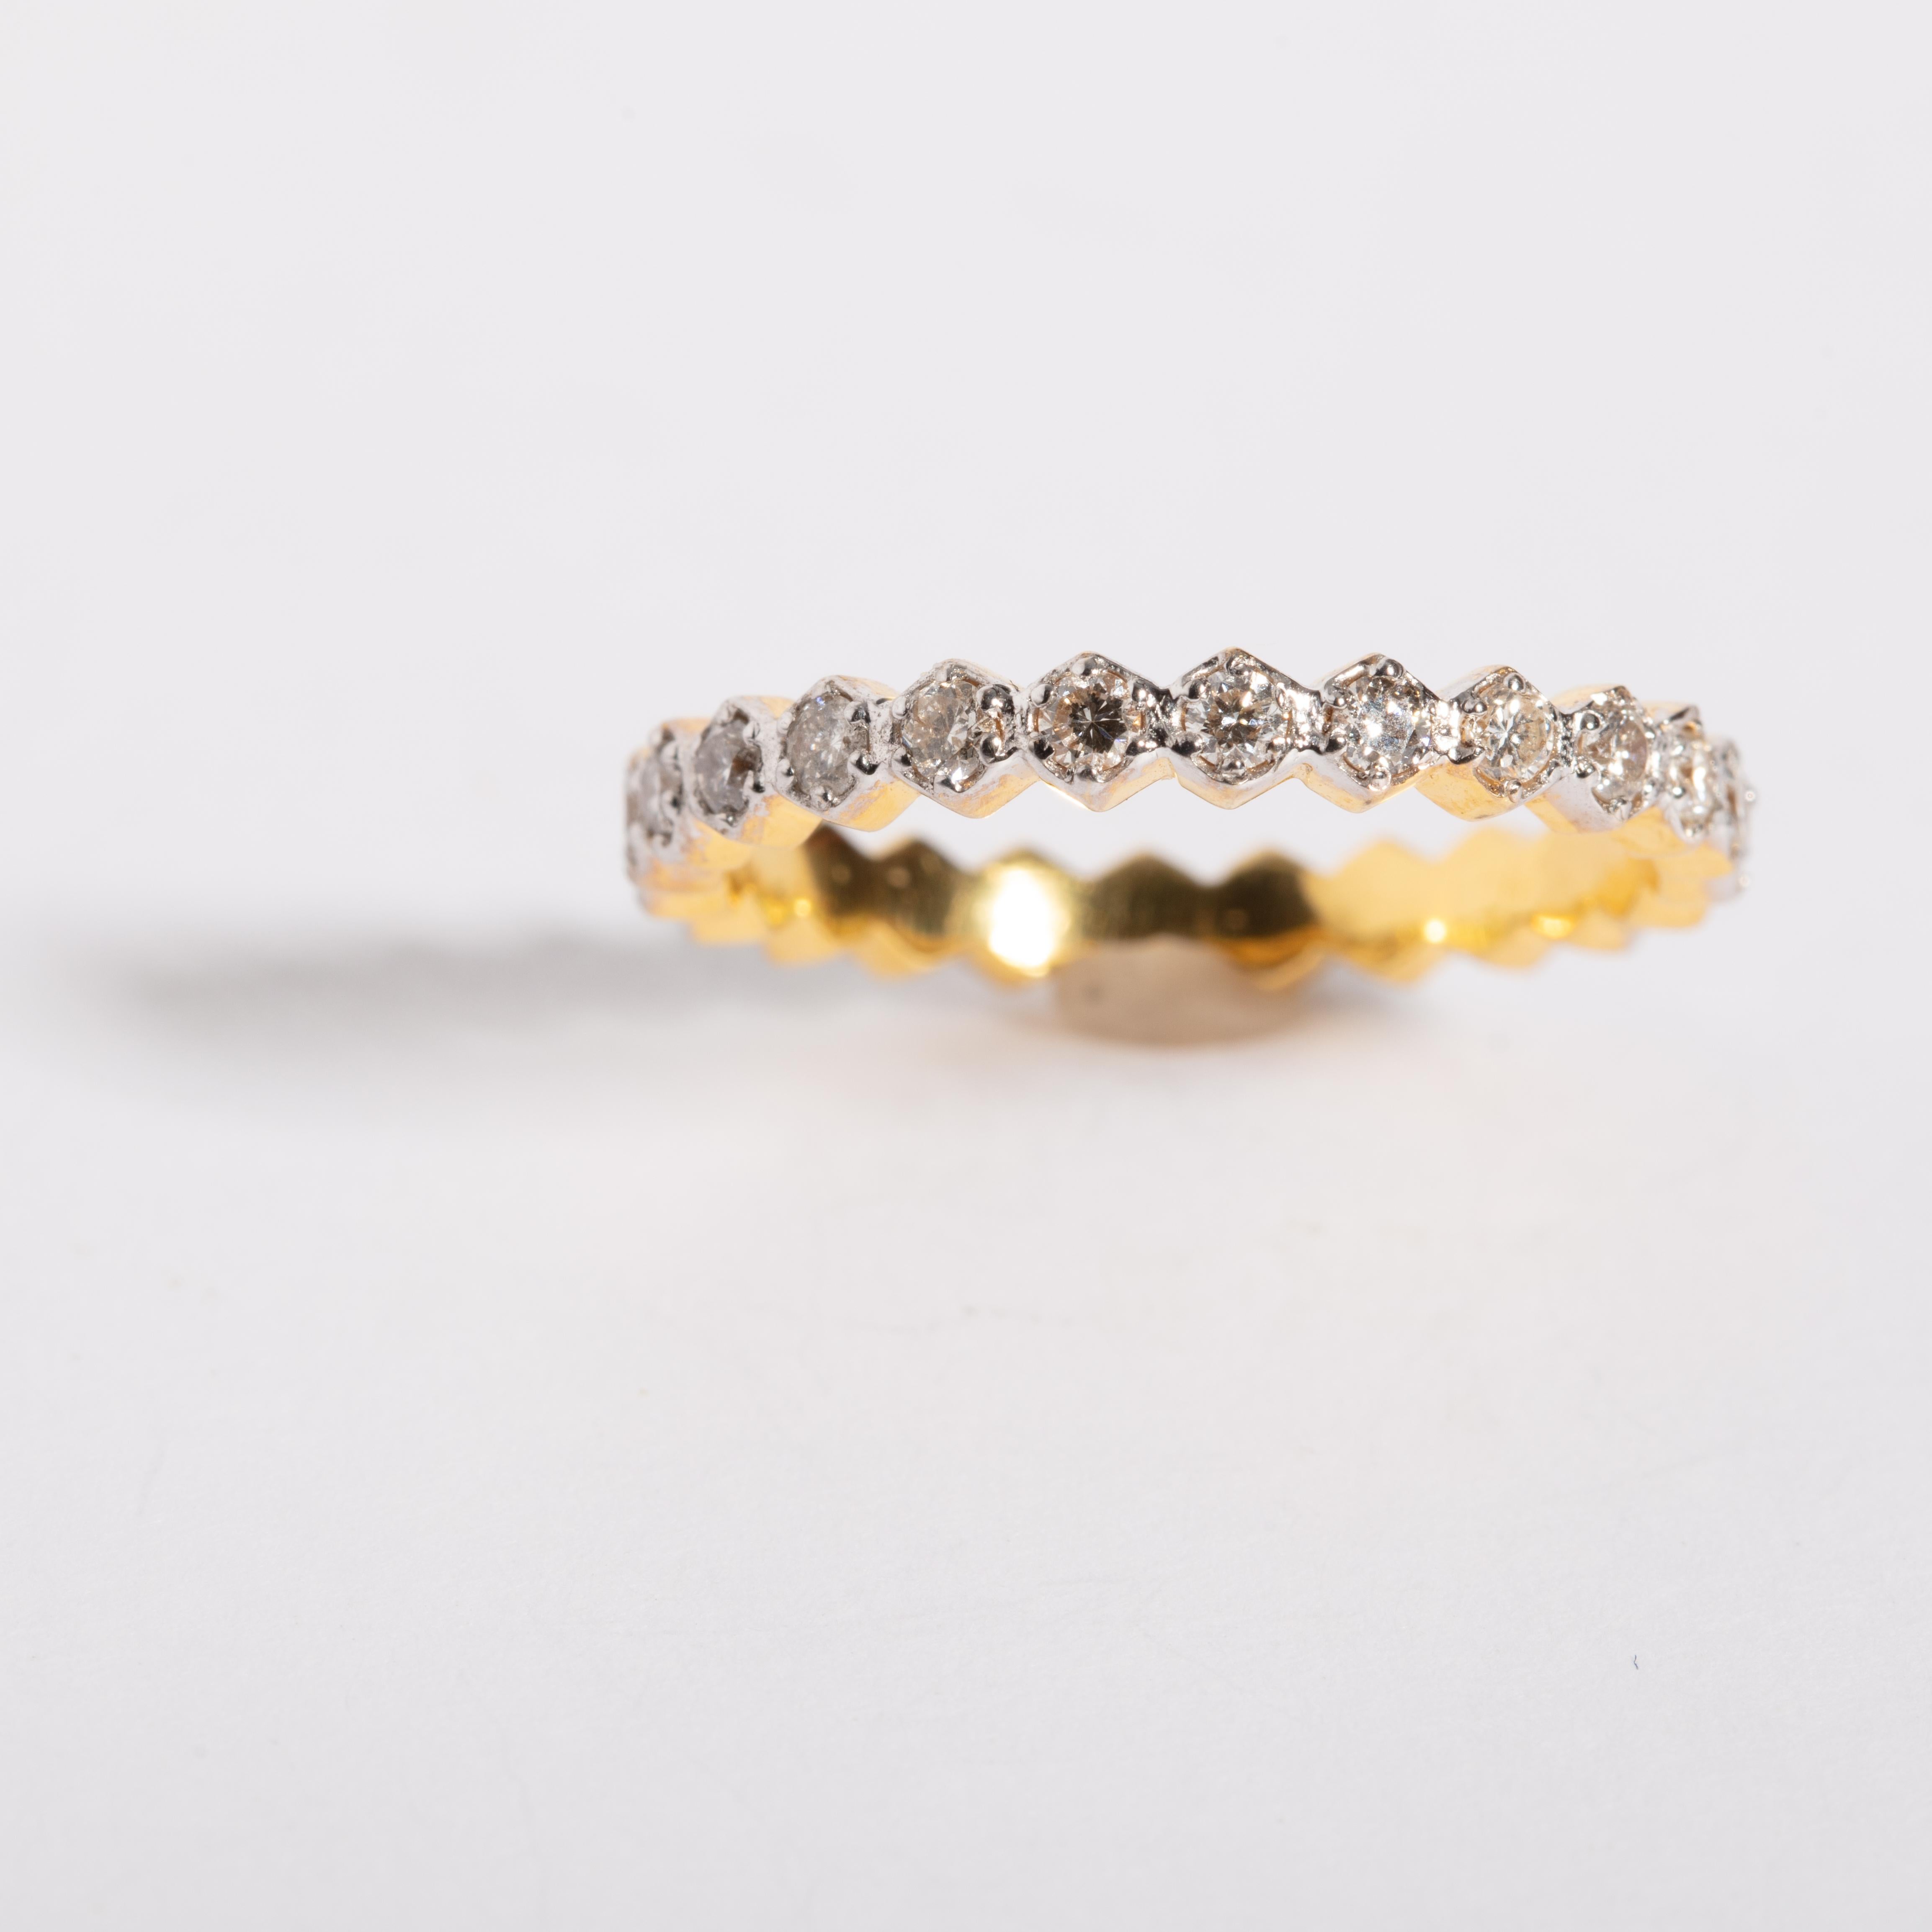 An eternity 18K gold band of round, brilliant cut diamonds.  Carat weight is .64.  Ring size is 7.25.  Use as a wedding band or stack with others.